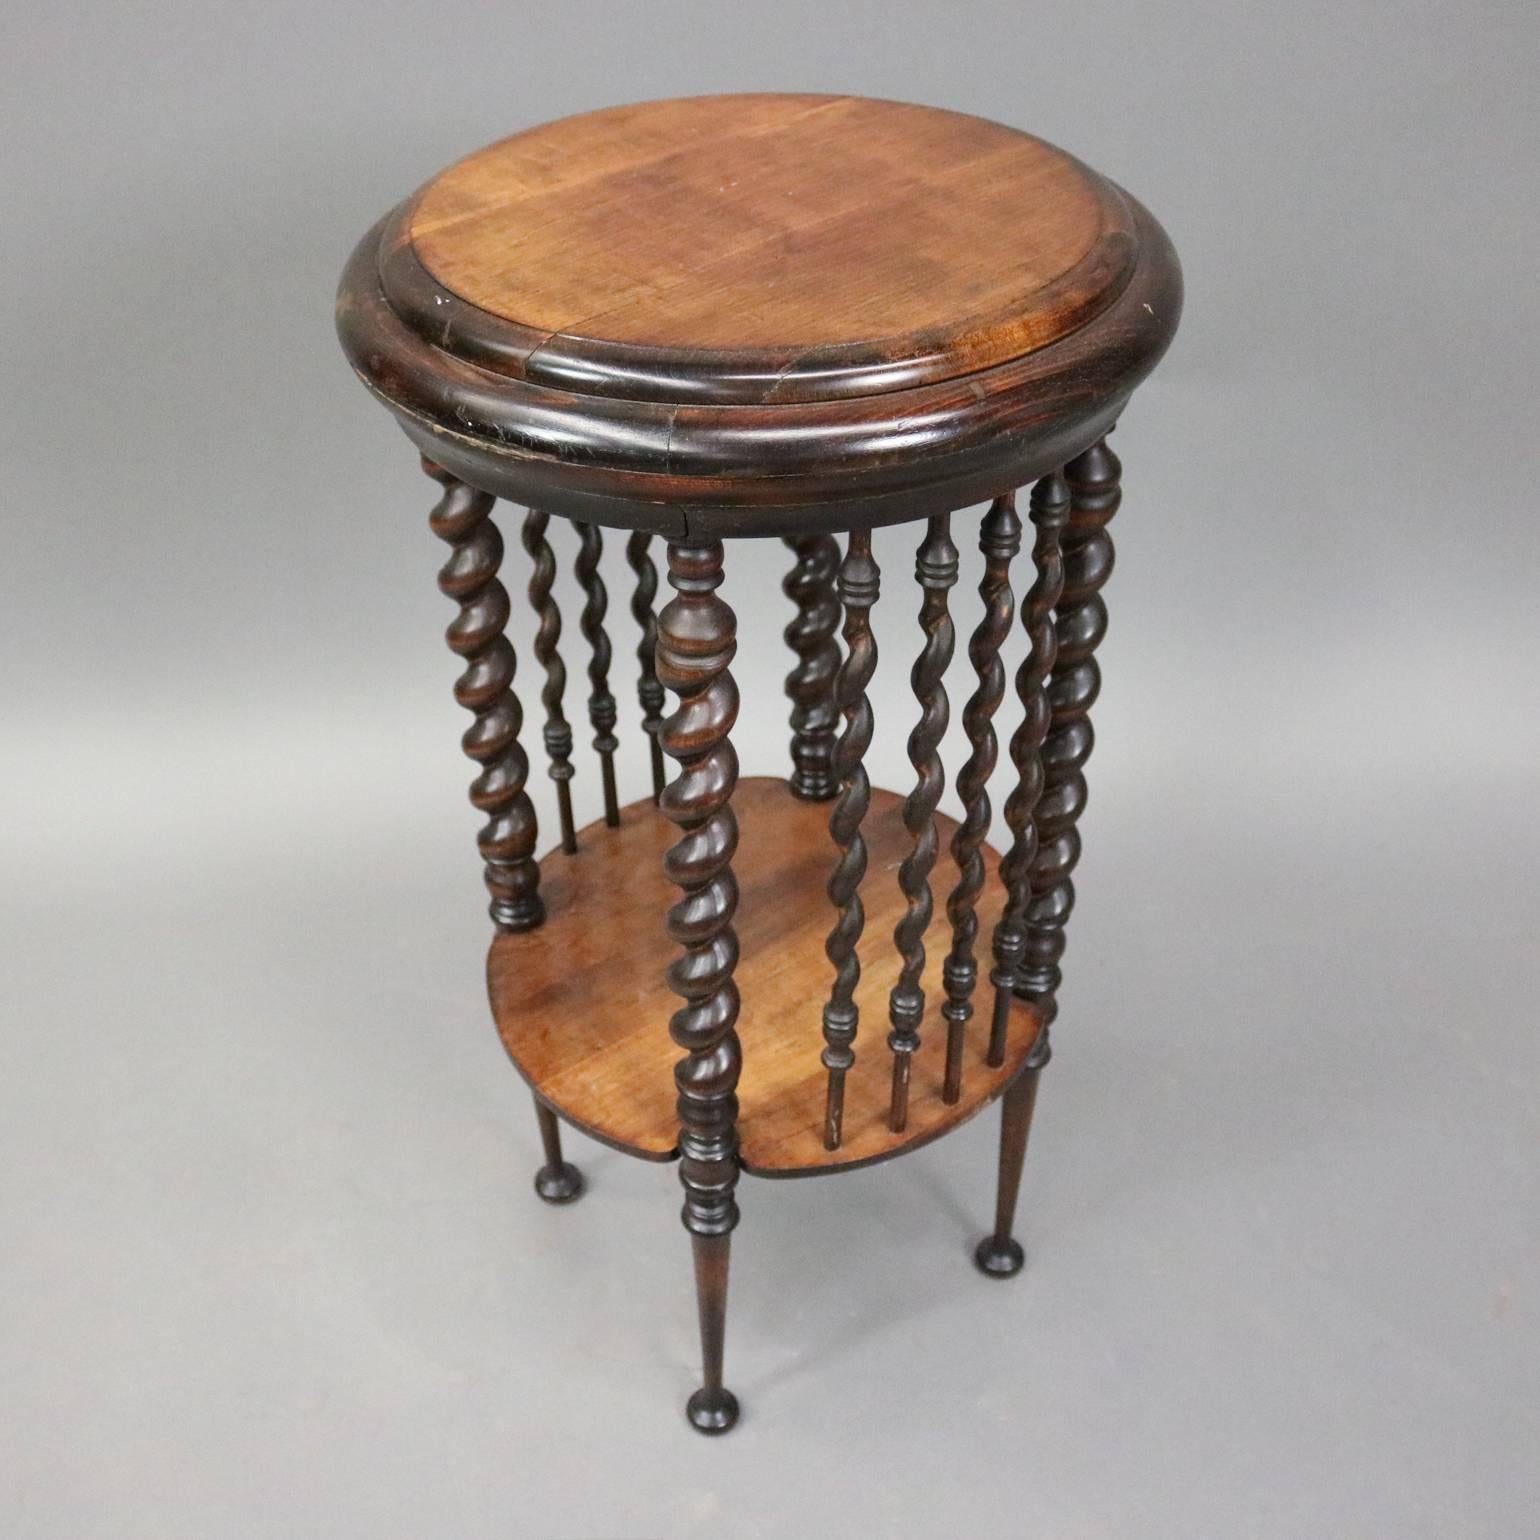 Antique mahogany plant stand features barley twist legs and spindles, circa 1900

Measures: 30" H x 16" diameter.